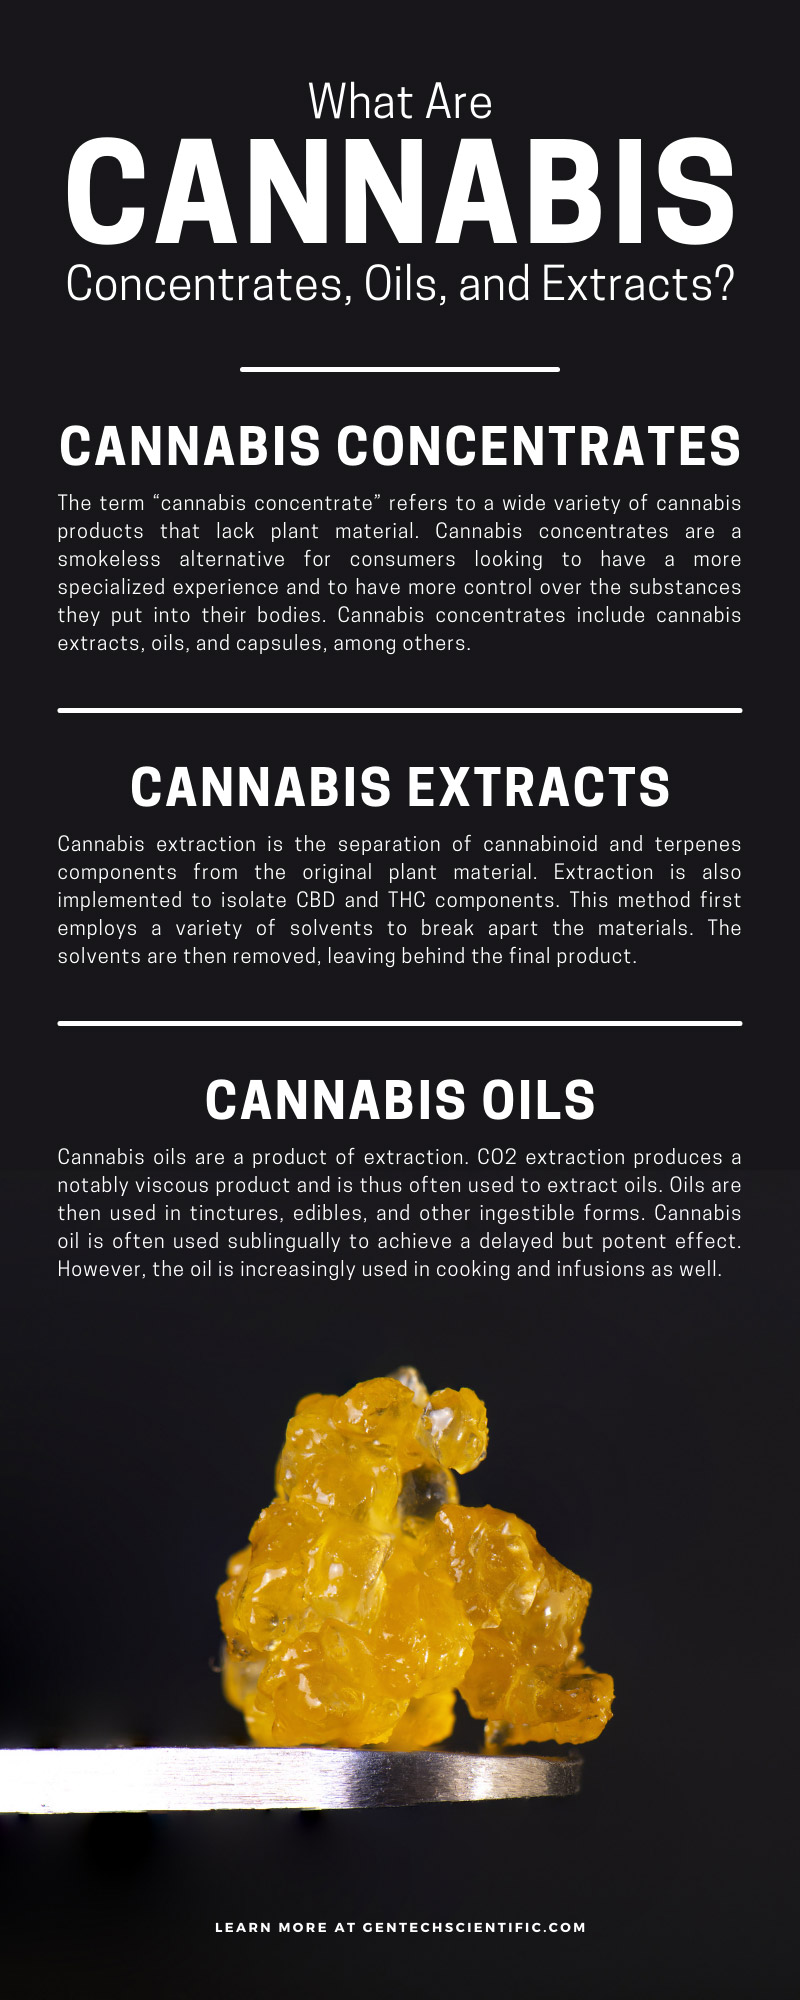 What Are Cannabis Concentrates, Oils, and Extracts?